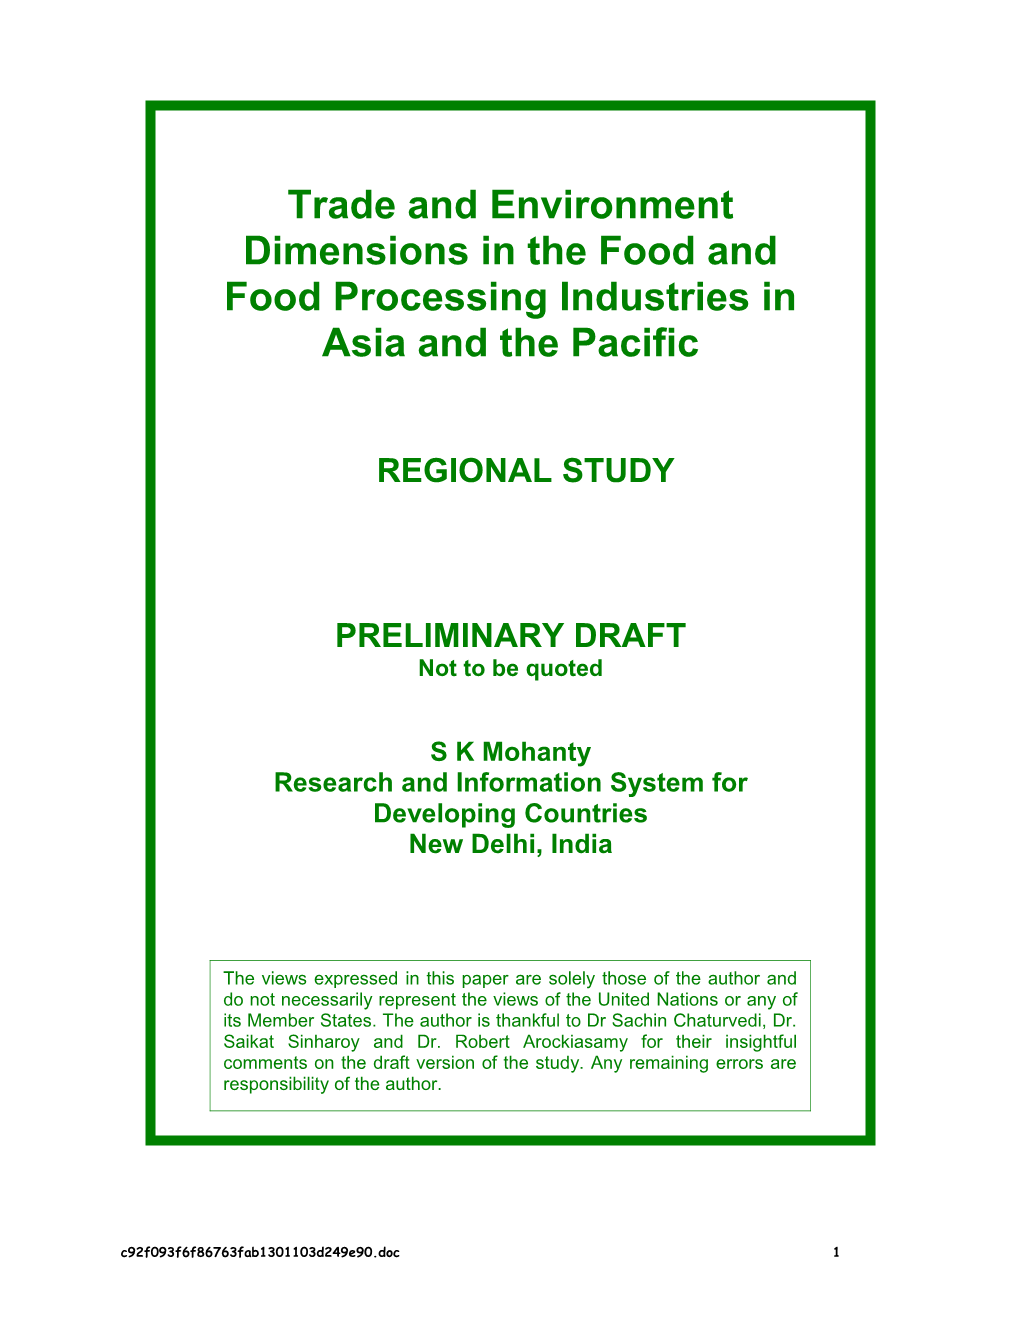 Trade and Environment Linkages in the Food and Food Processing Industry: an Analytical Framework